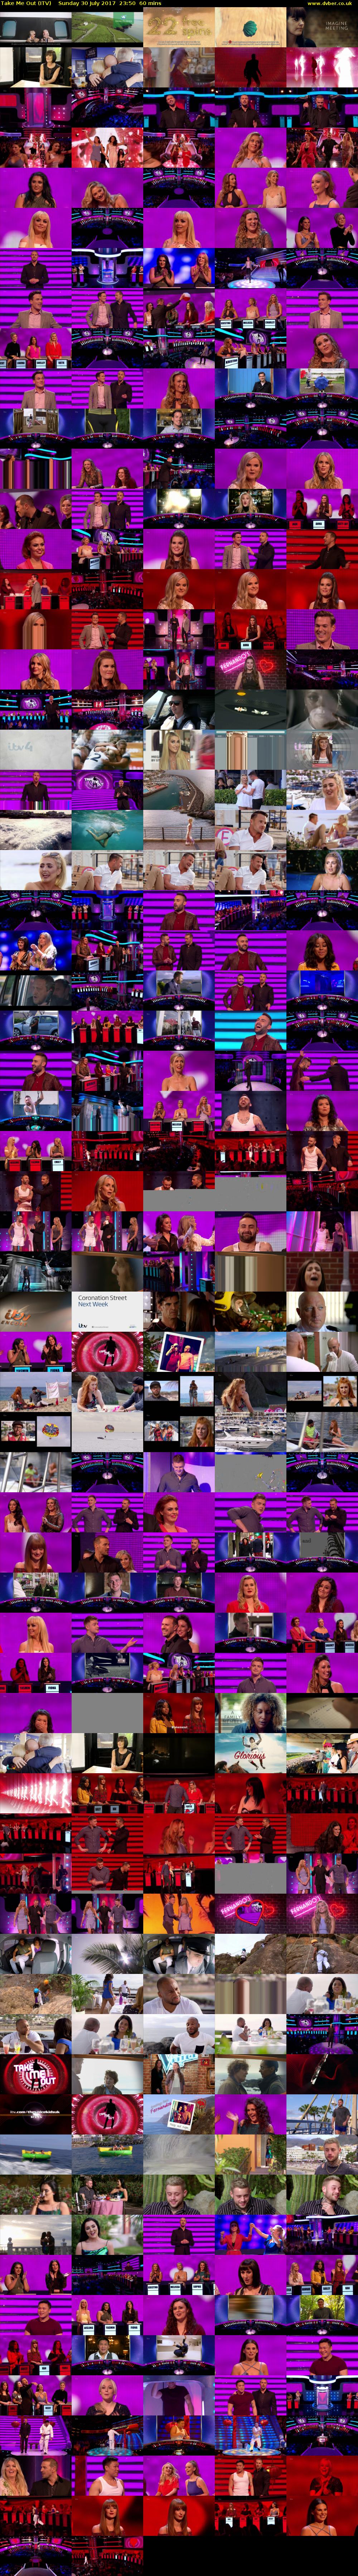 Take Me Out (ITV) Sunday 30 July 2017 23:50 - 00:50